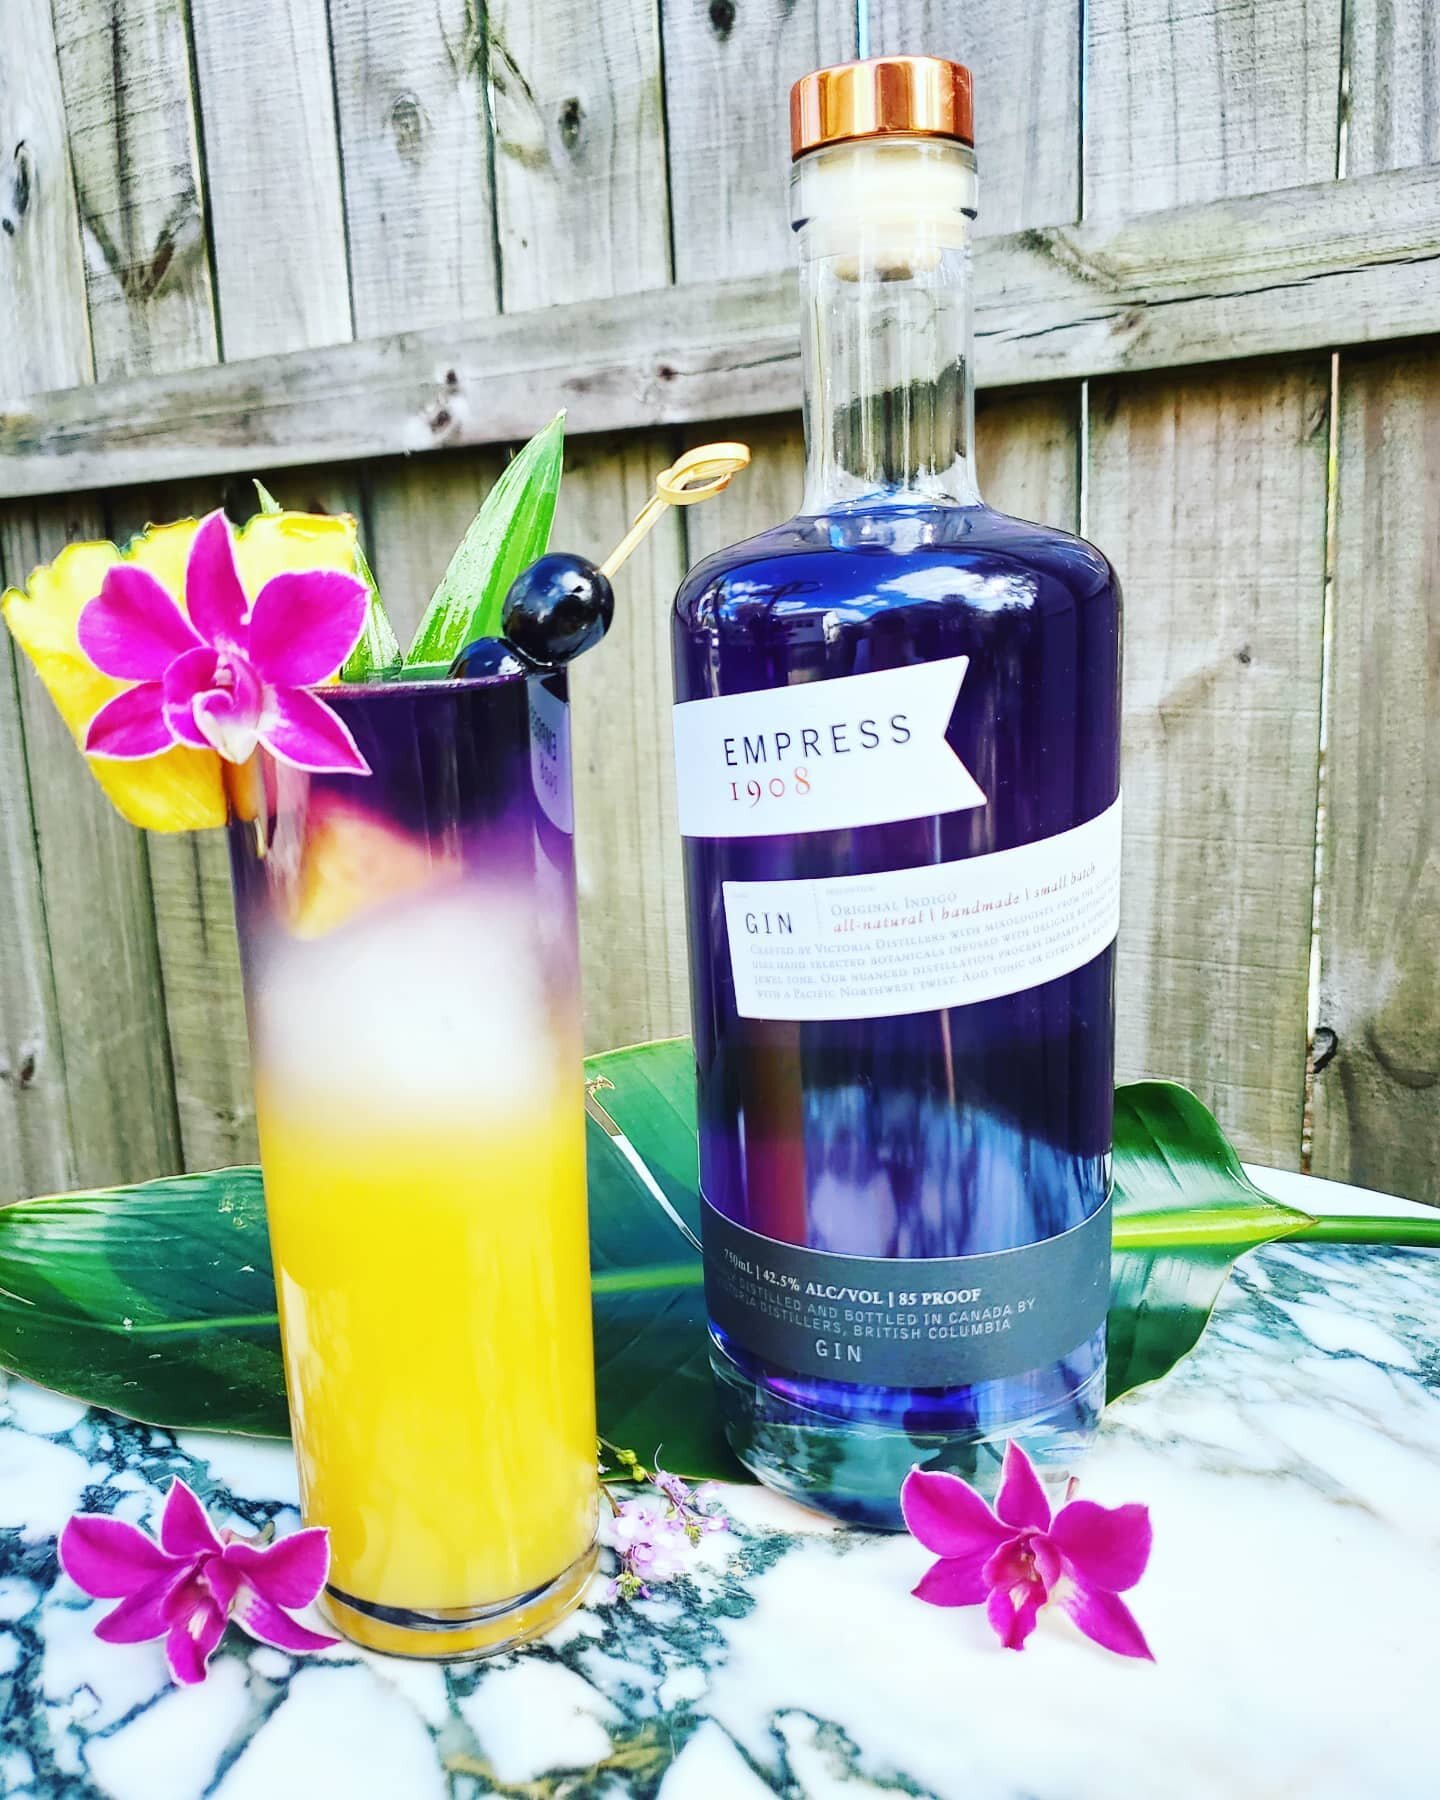 Is Wednesday too early to make a cocktail? Asking for a friend. 😂 #sponsored 

I'm in love with the color of Empress 1908 Gin! Butterfly Pea Blossoms impart subtle earthy notes and an all-natural indigo hue to the gin.  And if you add citrus or toni